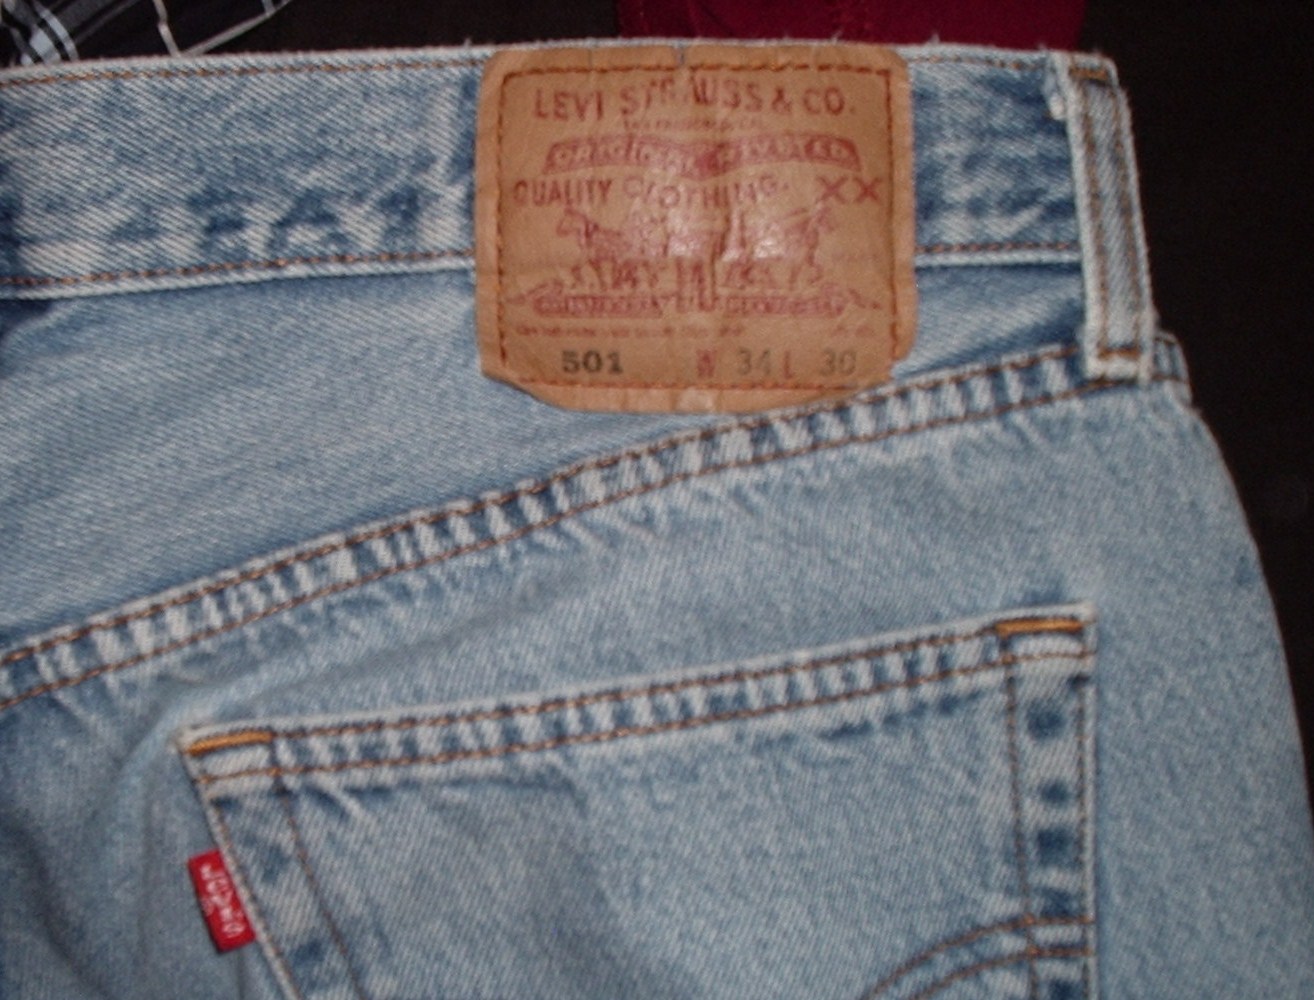 used 501 levi jeans